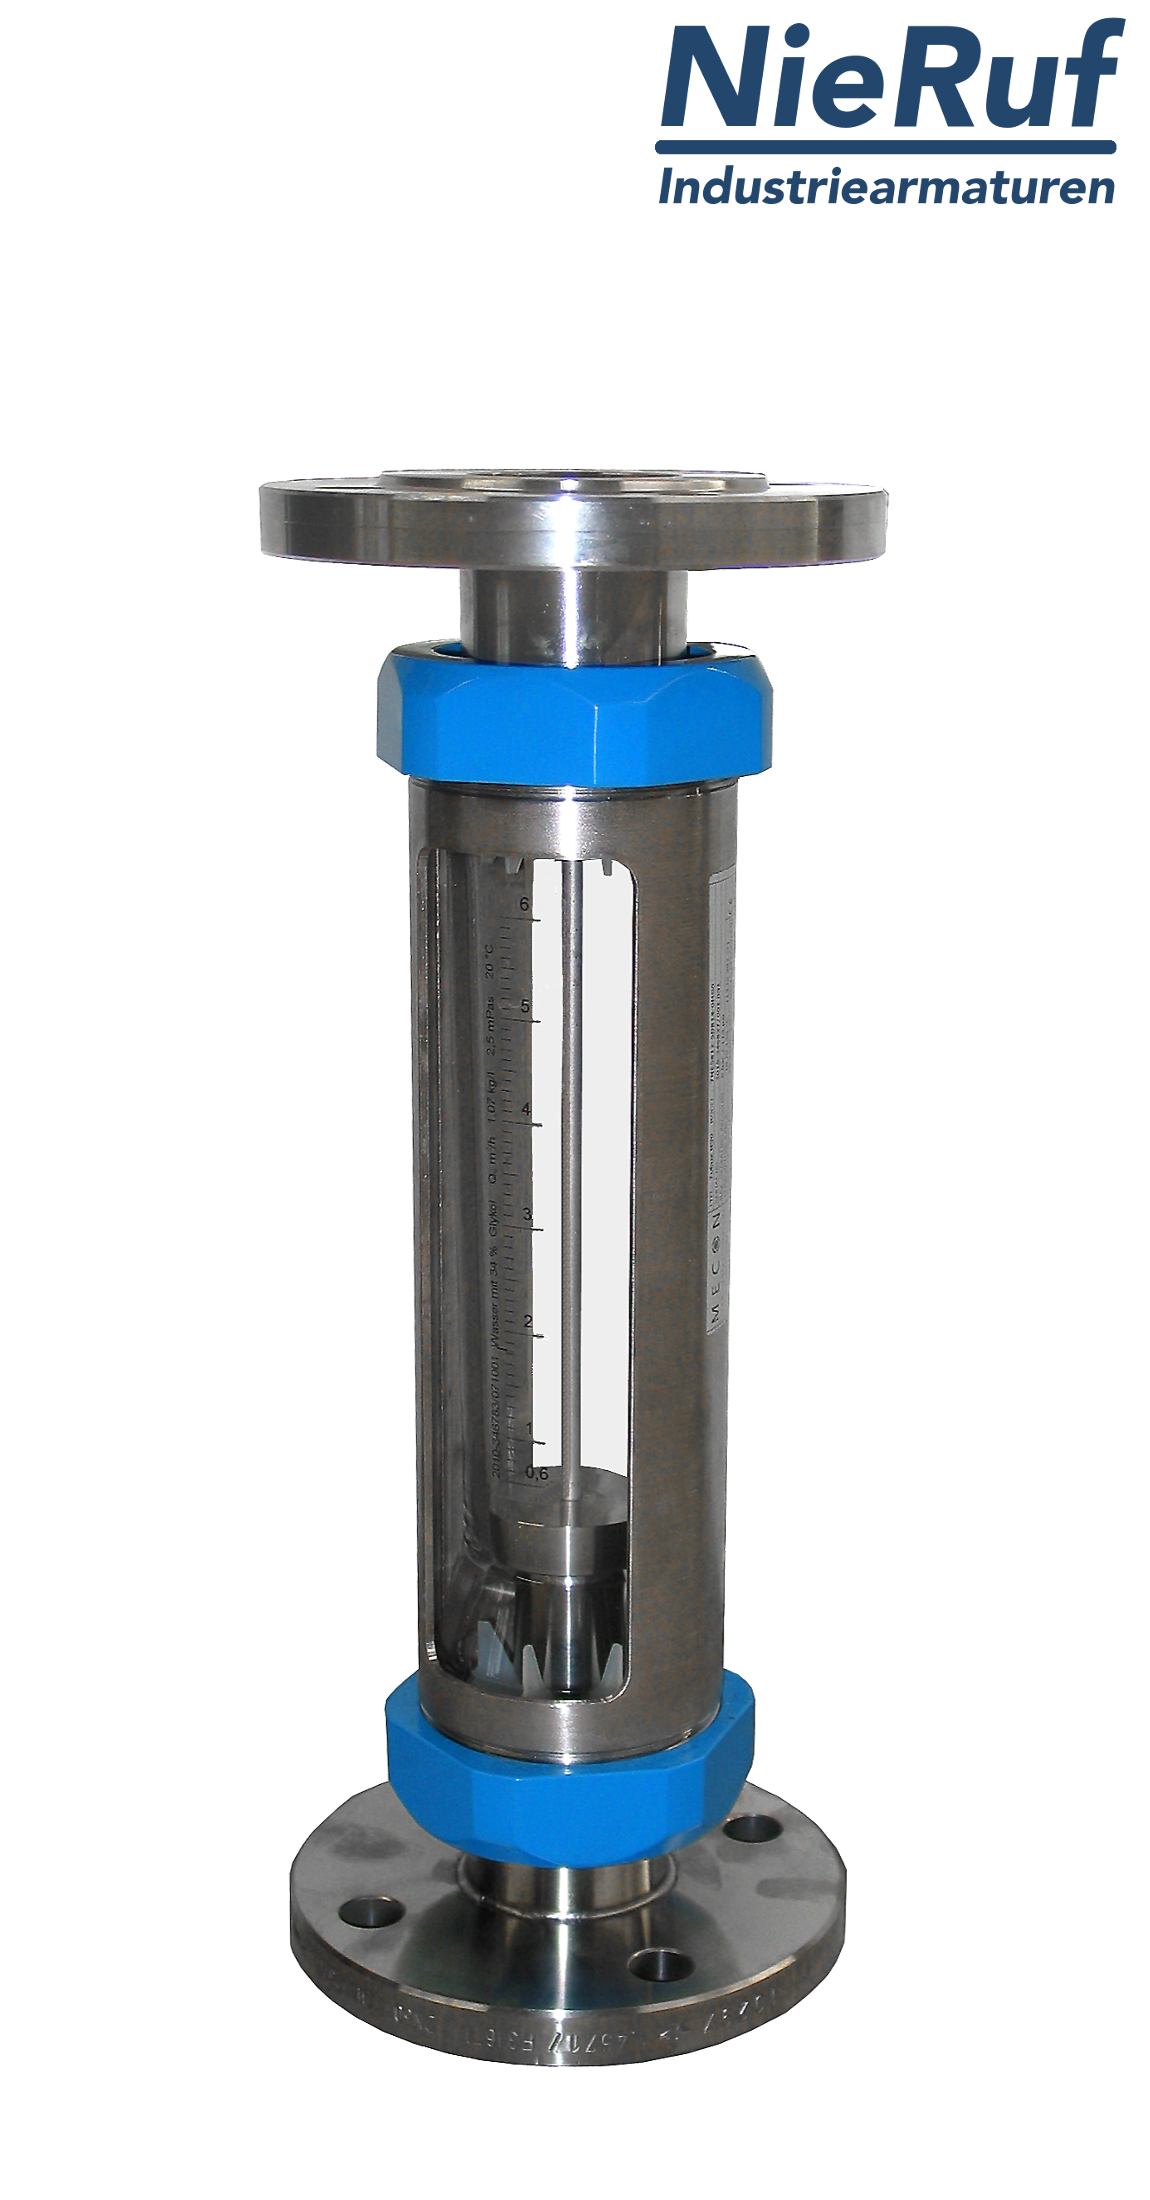 Variable area flowmeter stainless steel + borosilicate flange DN25 25.0 - 250 l/h water FKM